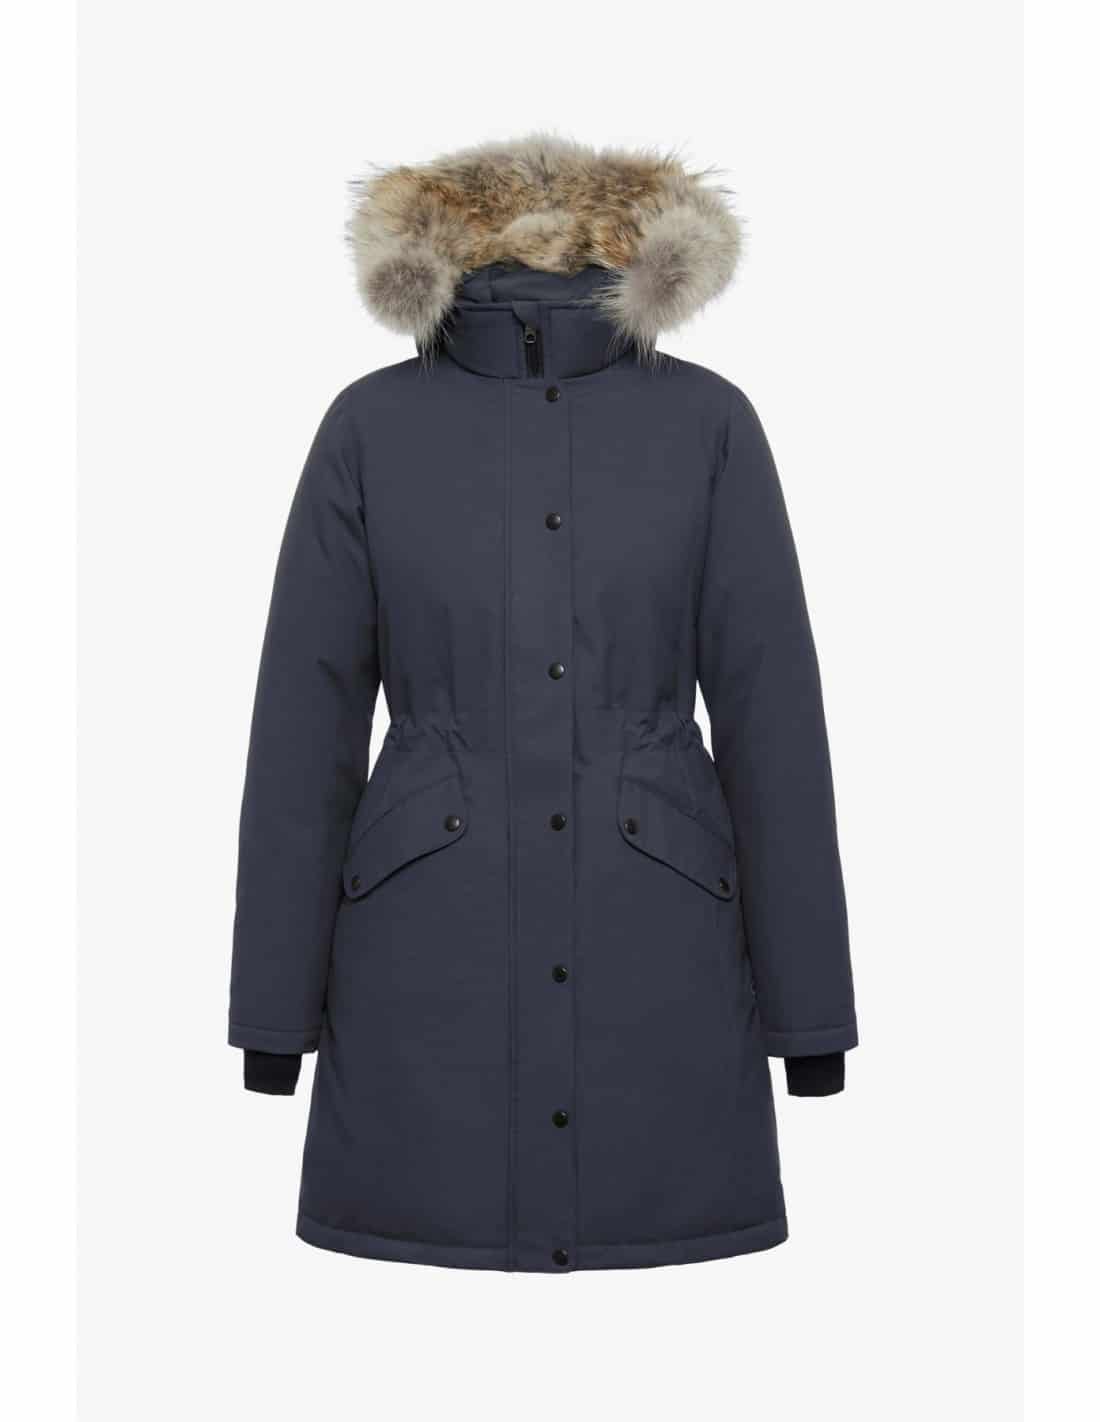 parka hiver femme grand froid